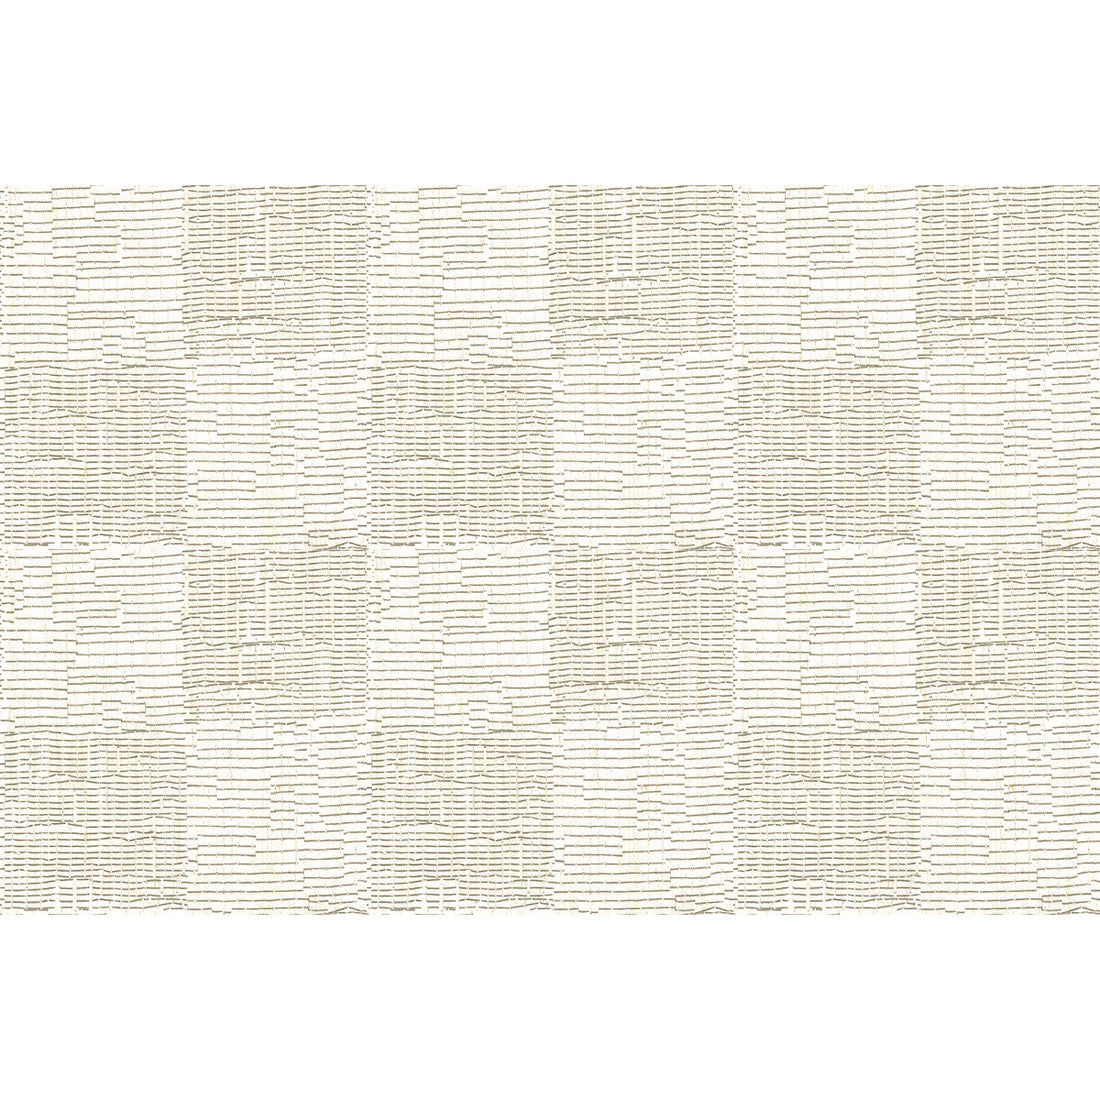 Matsue fabric in parchment color - pattern 33131.1630.0 - by Kravet Couture in the Pacific Rim collection